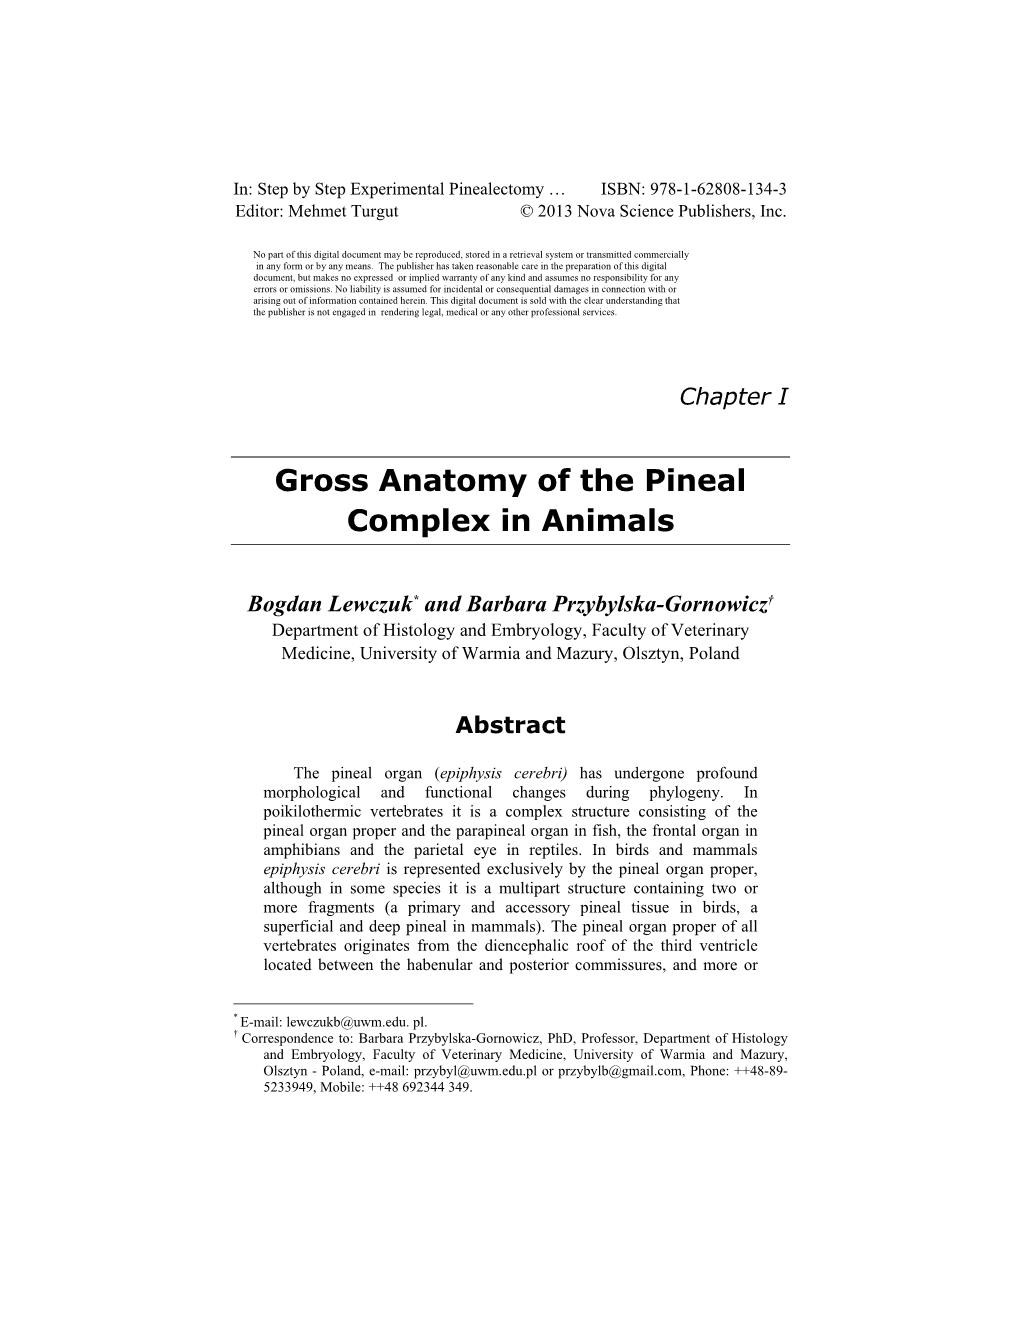 Gross Anatomy of the Pineal Complex in Animals